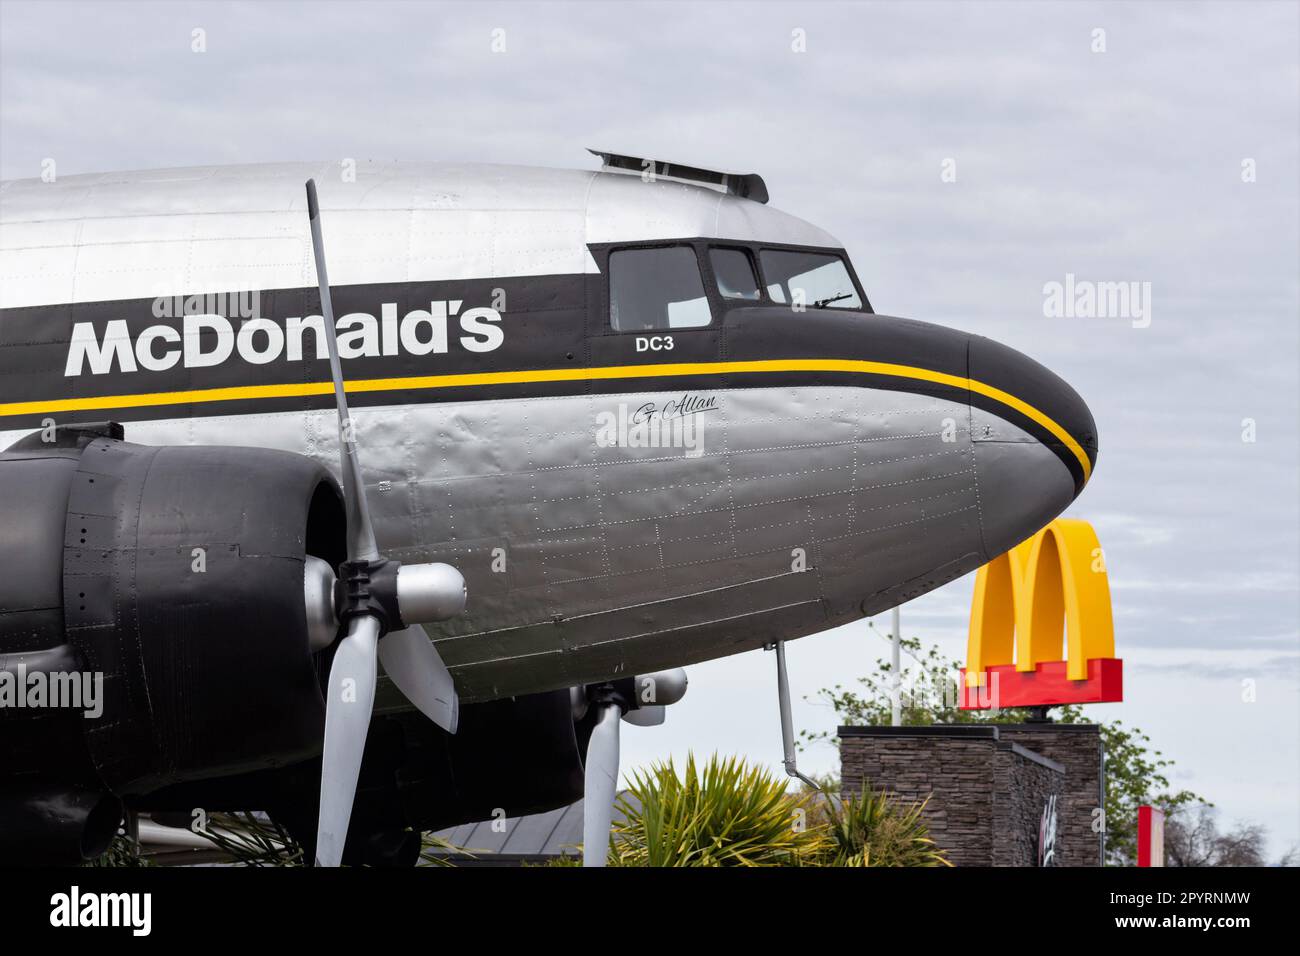 Taupo, New Zealand - October 25, 2022: A close up view of the iconic DC-3 plane which has been converted into a McDonald's restaurant in Taupo, New Ze Stock Photo